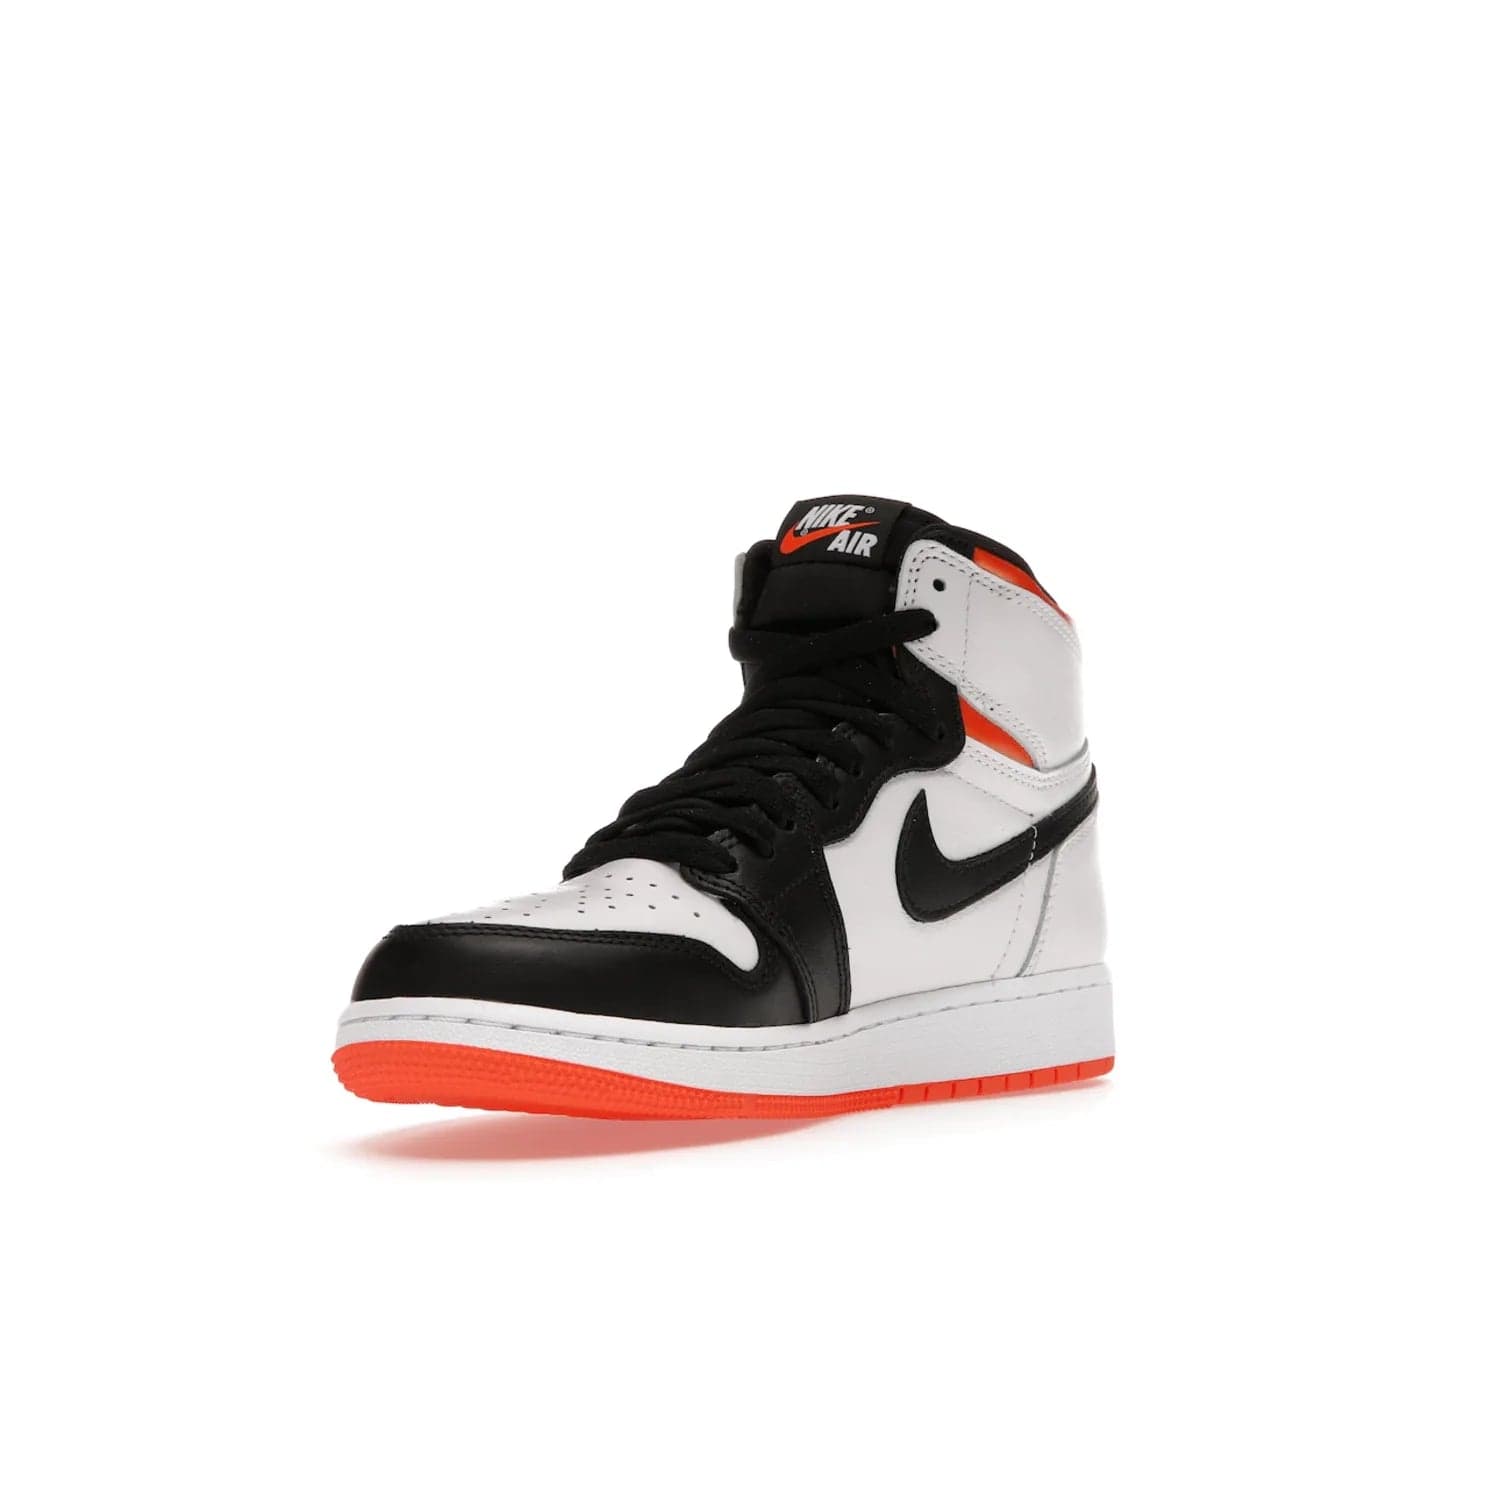 Jordan 1 High OG Electro Orange (GS) - Image 14 - Only at www.BallersClubKickz.com - The Air Jordan 1 High OG Electro Orange GS is the ideal shoe for kids on the go. Featuring white leather uppers, black overlays, and bright orange accents, it's sure to become a favorite. A great mix of classic style and vibrant colors, the shoe delivers air cushioning for comfort and hard orange rubber for grip. Release on July 17th, 2021. Get them a pair today.